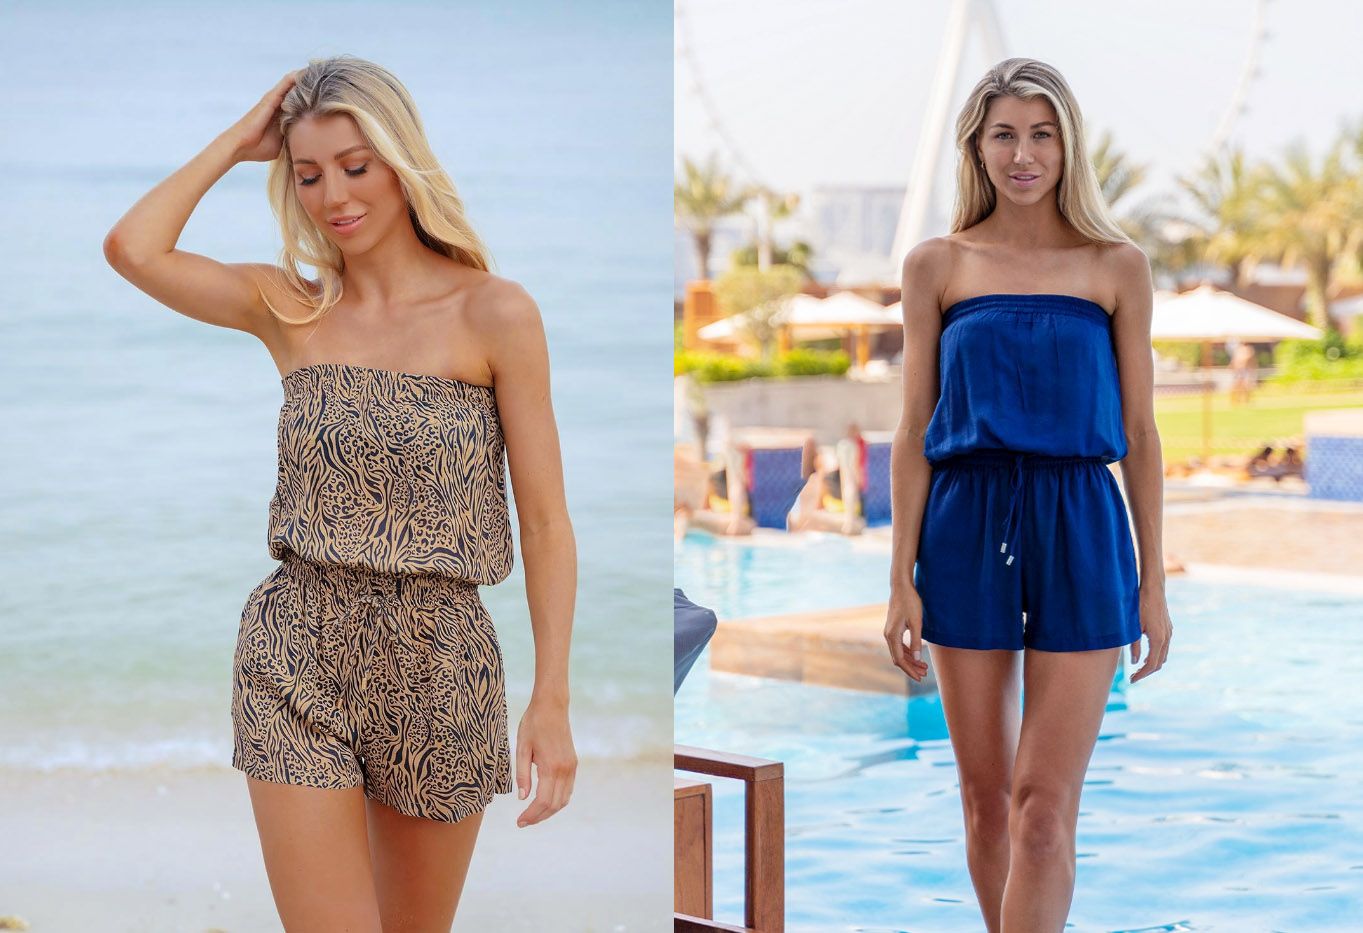 Outfits that would look great at brunch and the beach | Caha Capo - Luxury Swimwear